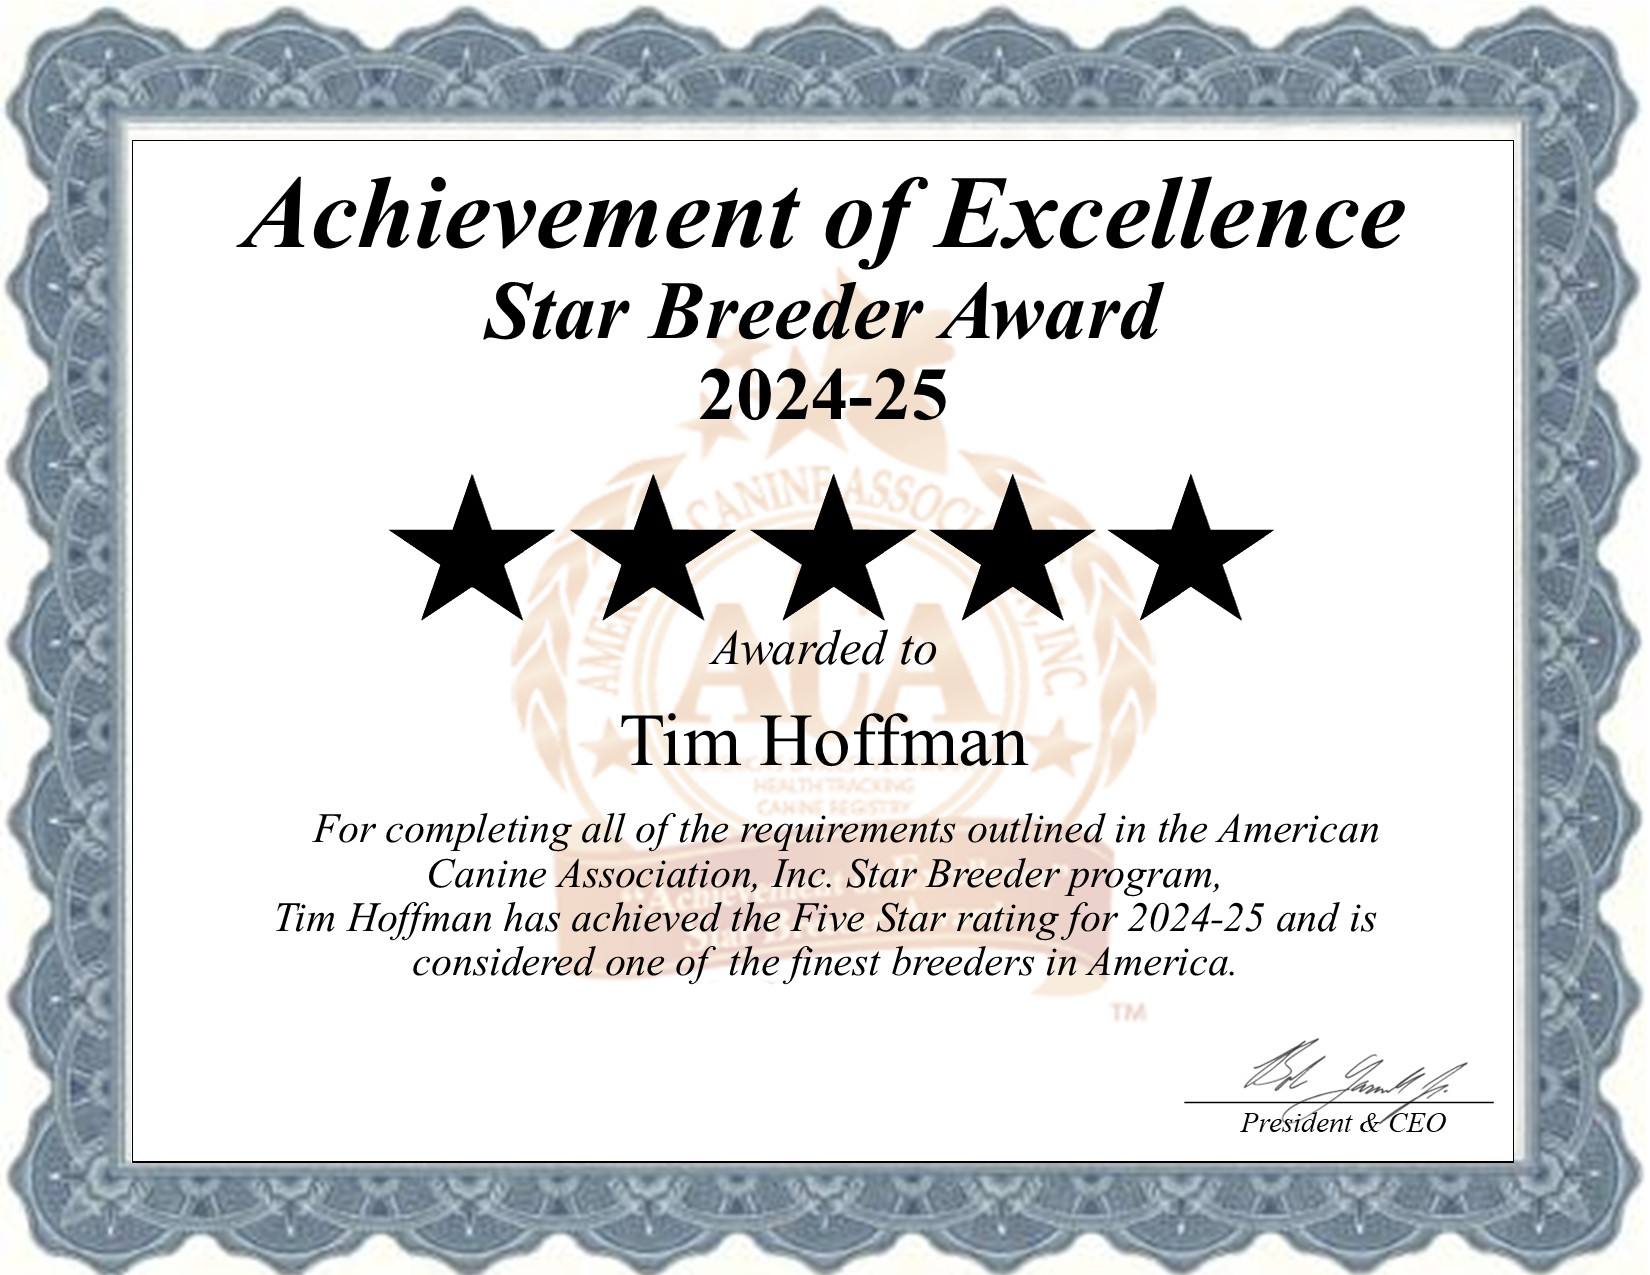 Tim, Hoffman, dog, breeder, star, certificate, Tim-Hoffman, Vincent, OH, Ohio, puppy, dog, kennels, mill, puppymill, usda, 5-star, aca, ica, registered, Toy Poodle, none